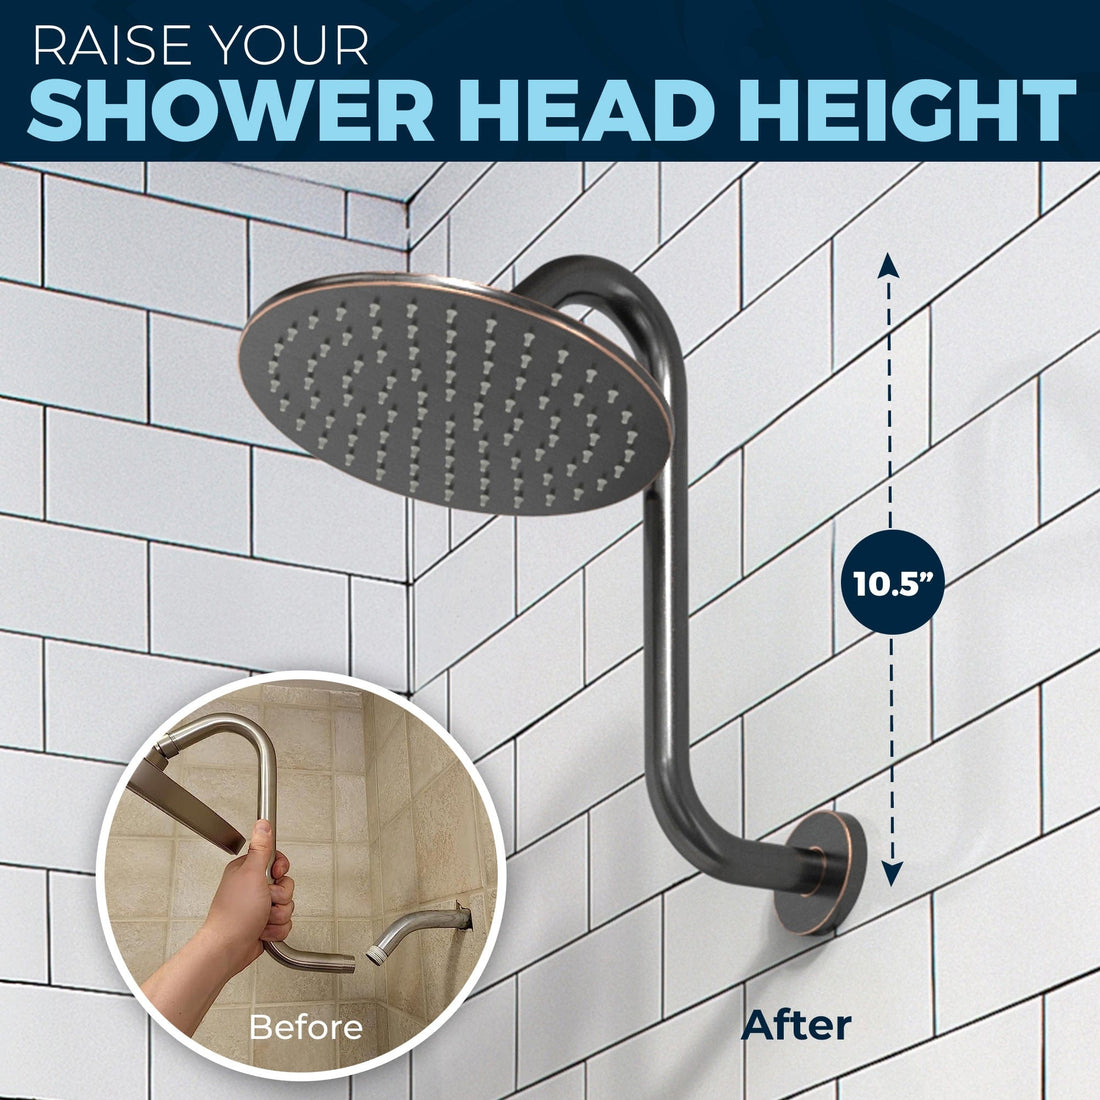 Benefit S-Style Arm Oil Rubbed Bronze/ 2.5 - The Shower Head Store